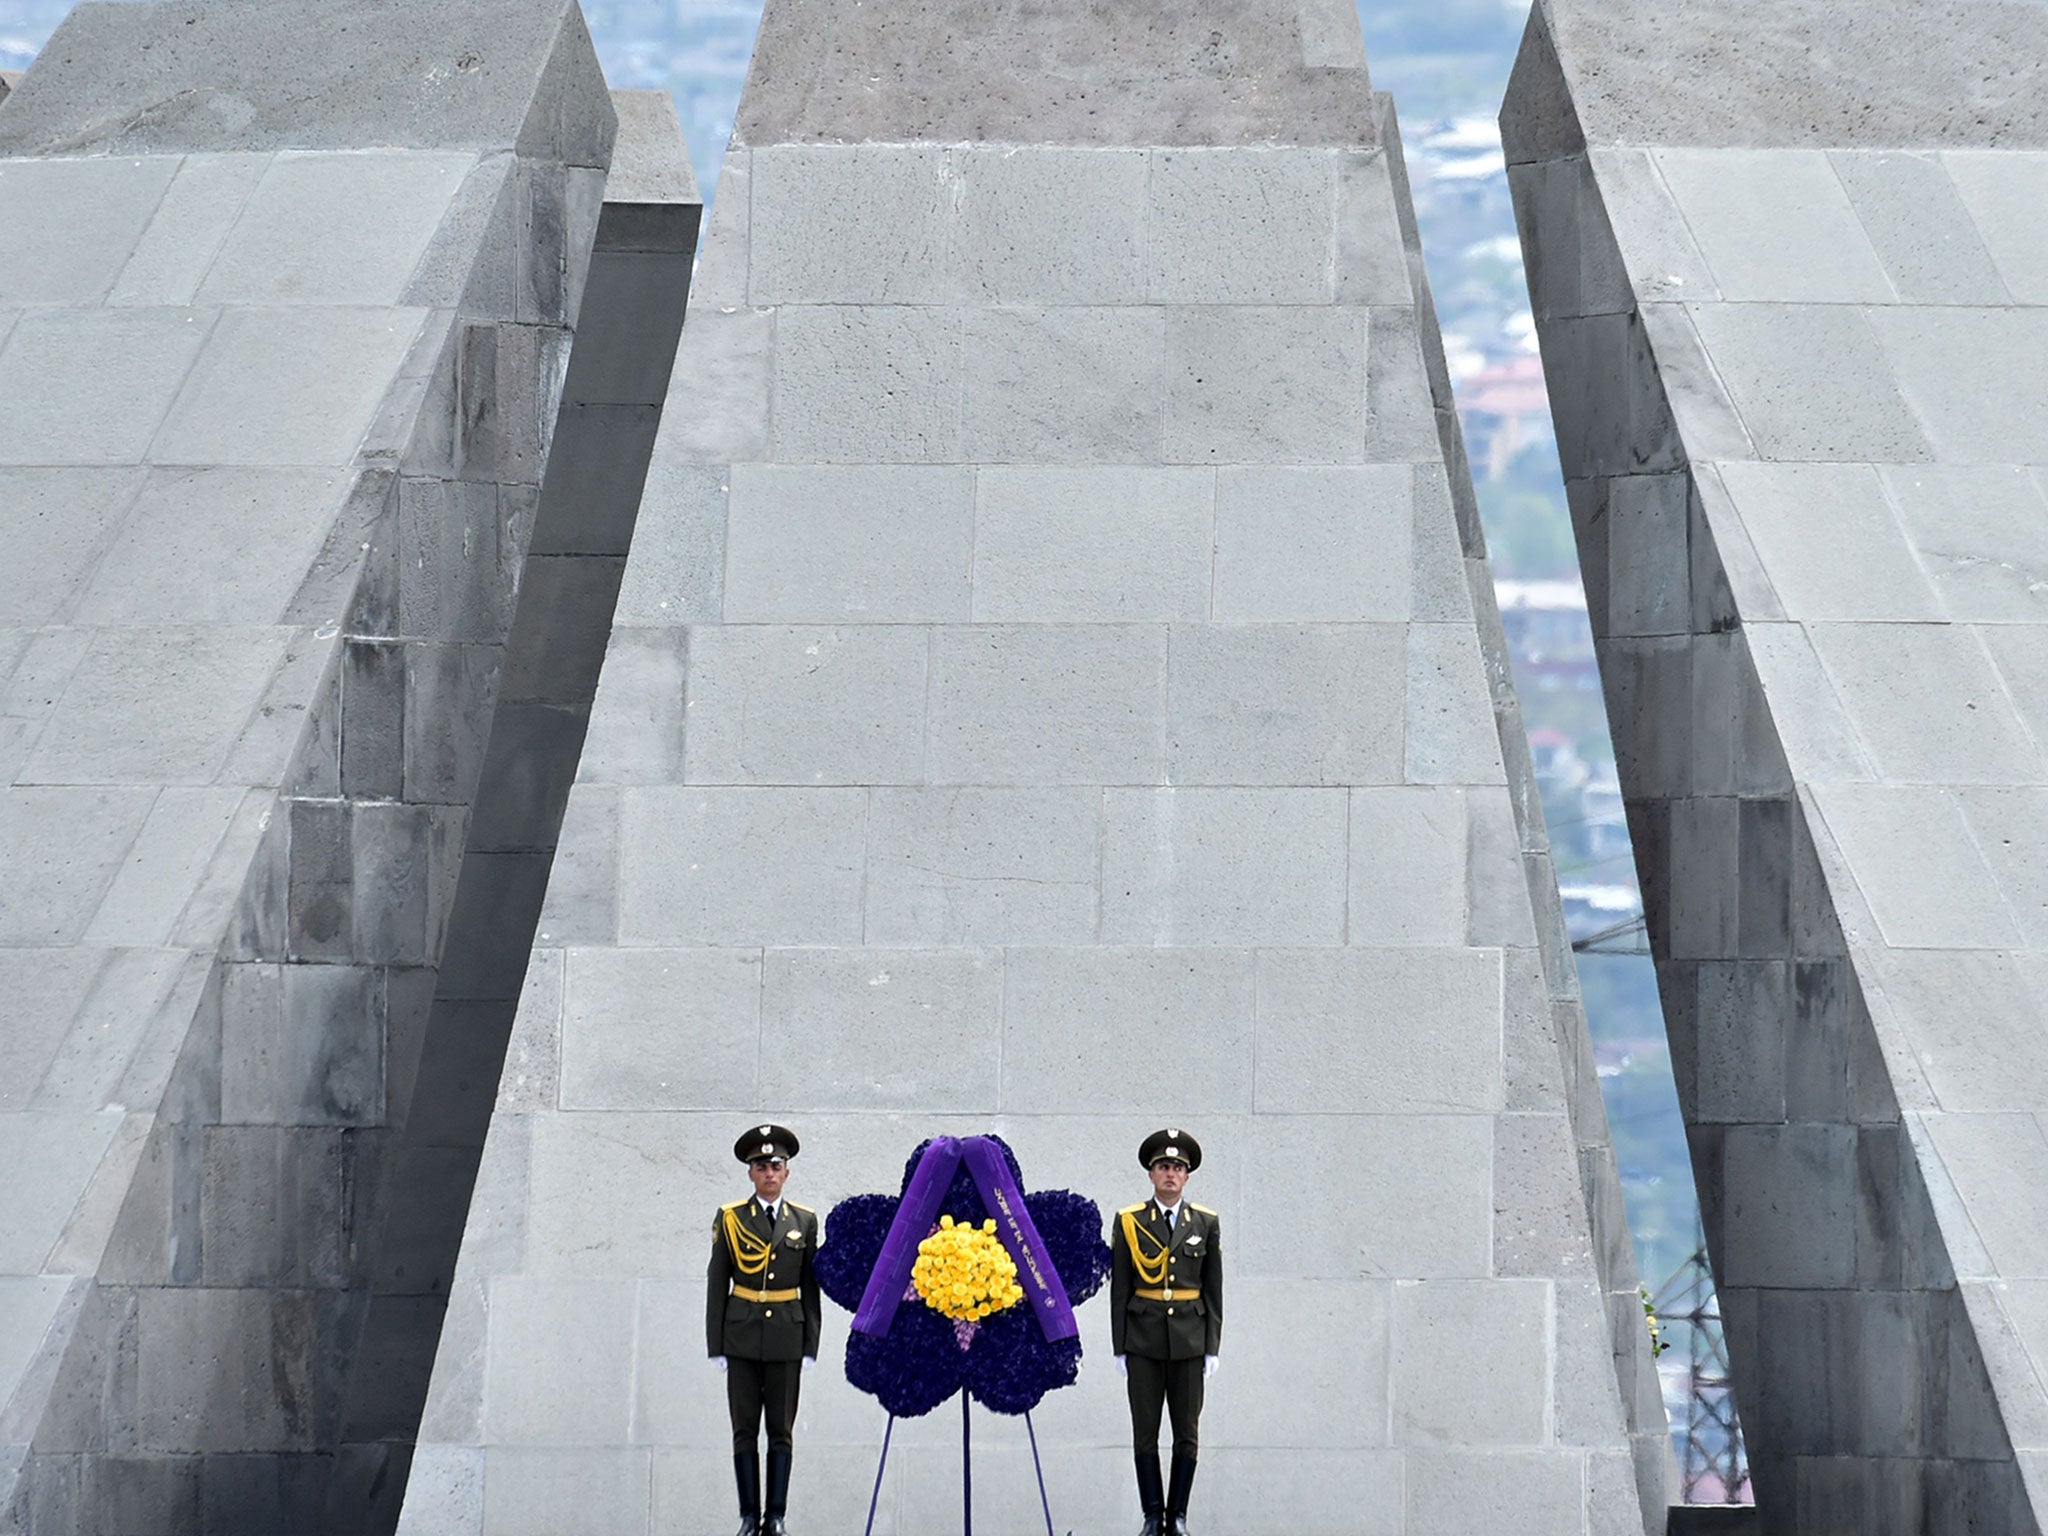 Soldiers stand guard in front of the Tsitsernakaberd Memorial in Yerevan during a commemoration ceremony for the 100th anniversary of the Armenian genocide